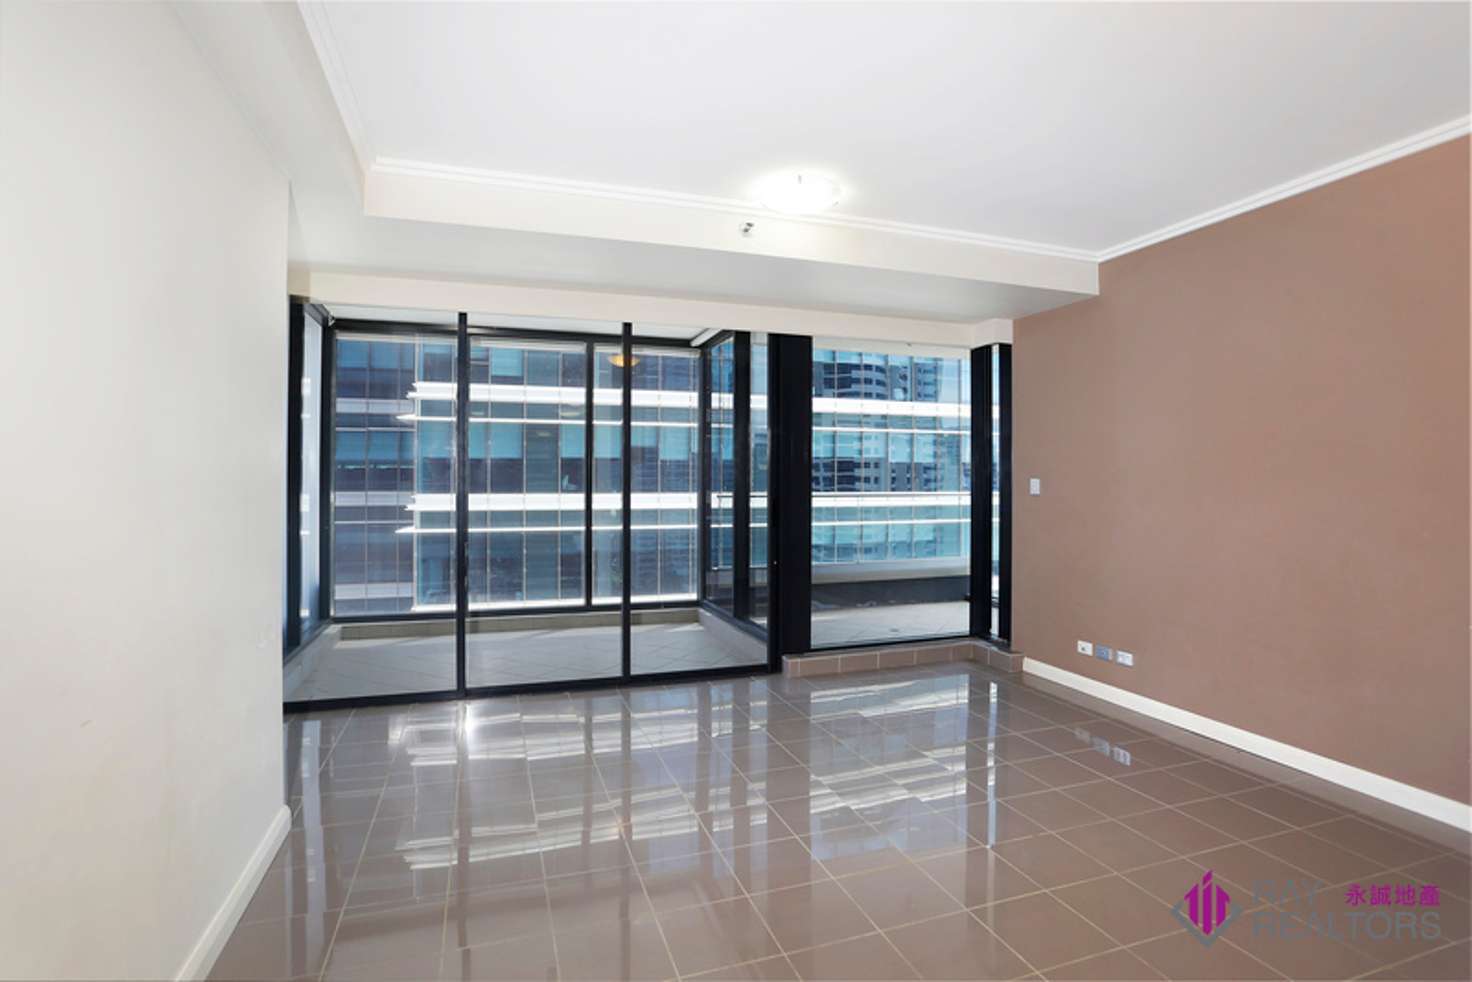 Main view of Homely apartment listing, 3204/91-93 Liverpool Street, Sydney NSW 2000